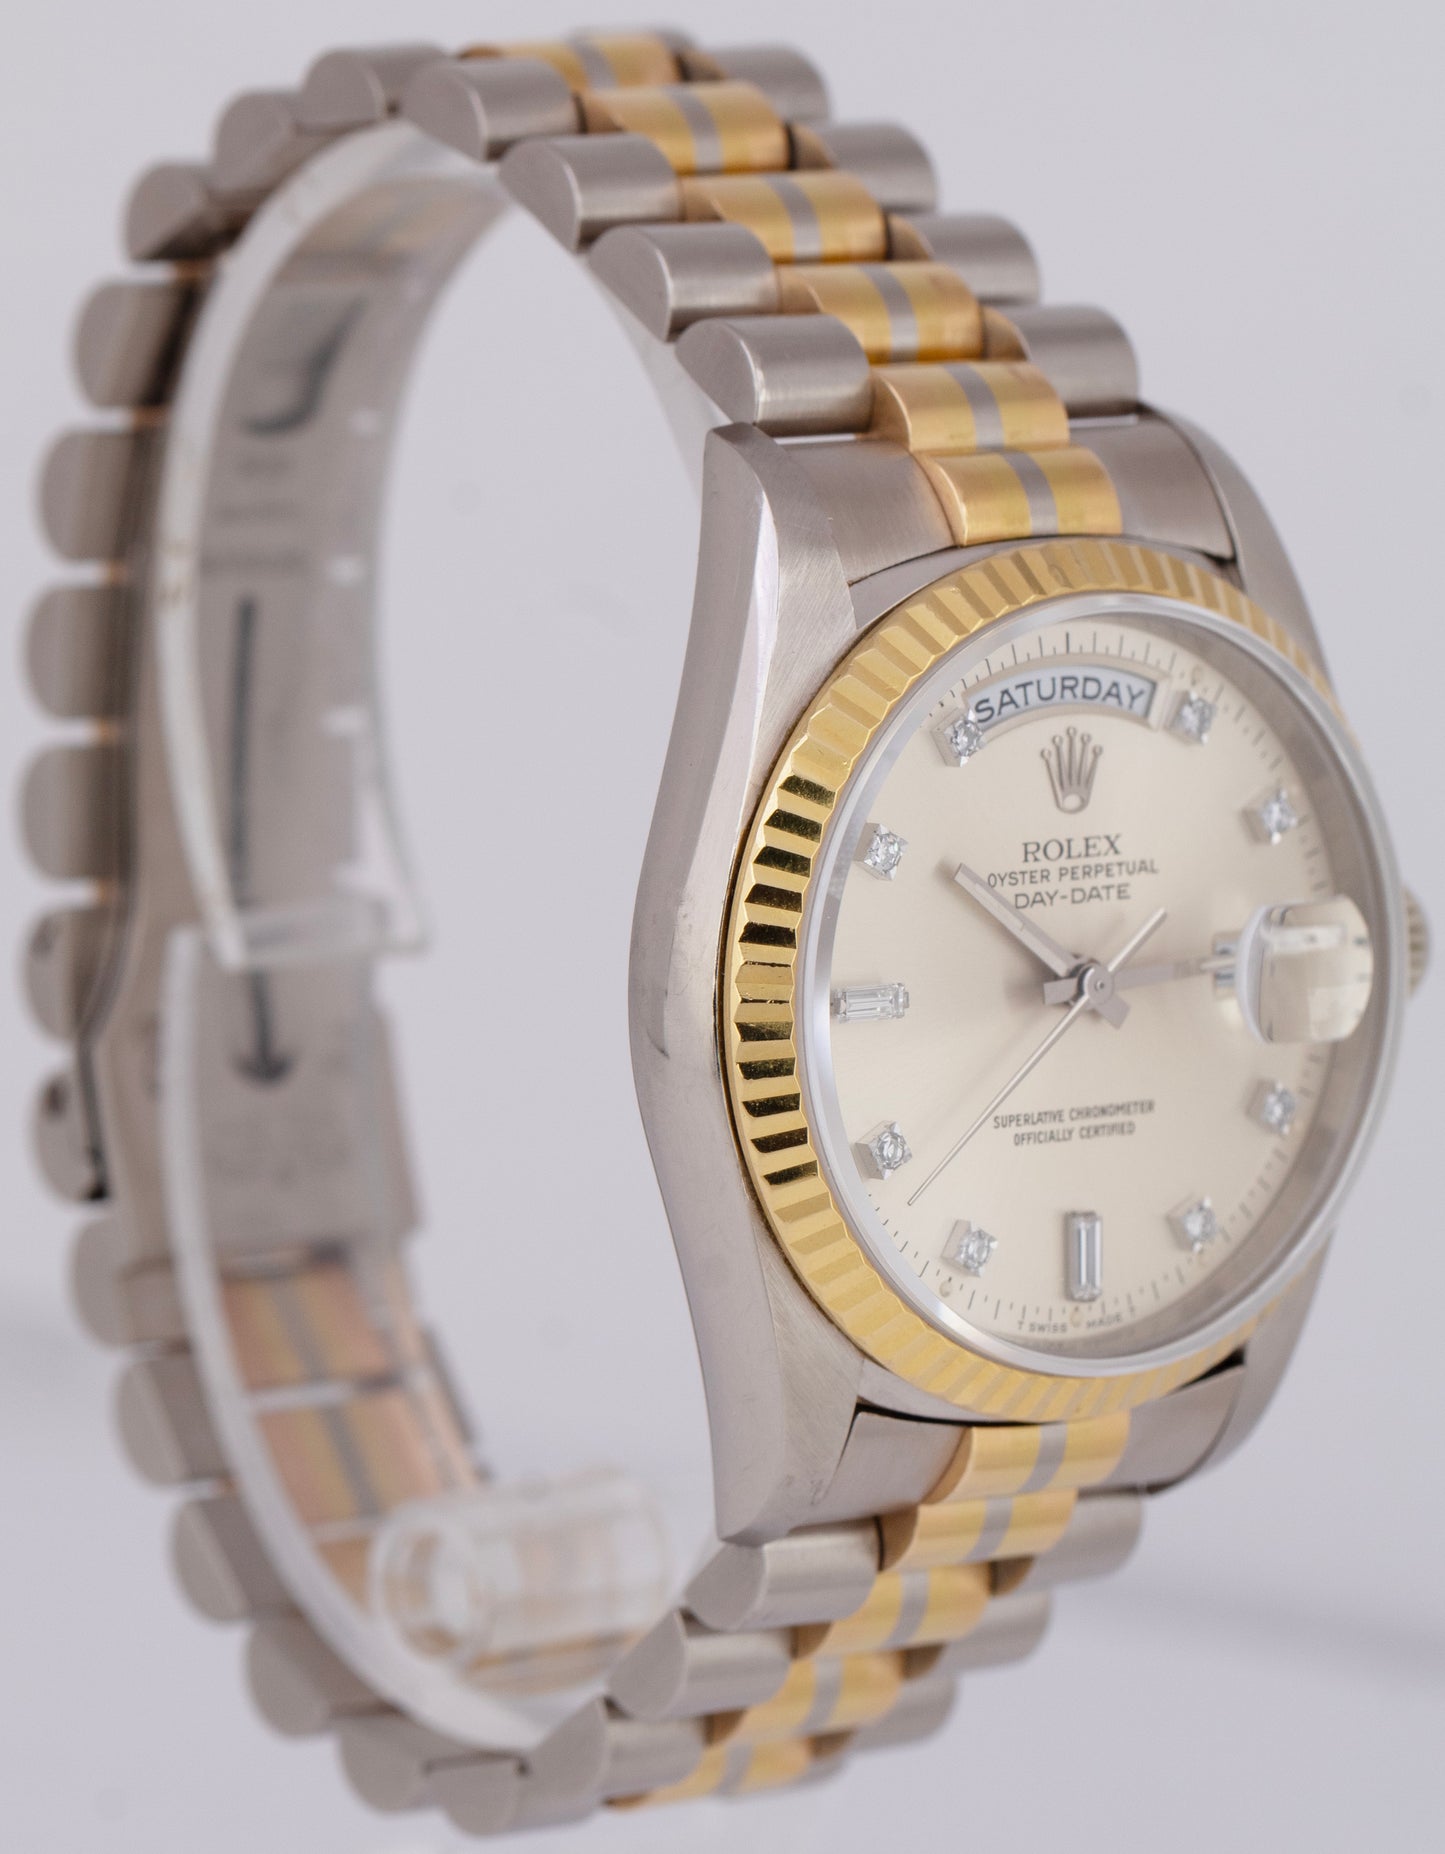 1990 Rolex Day-Date Tridor 18K Gold FACTORY SILVER DIAMOND Dial 36mm 18239 BIC